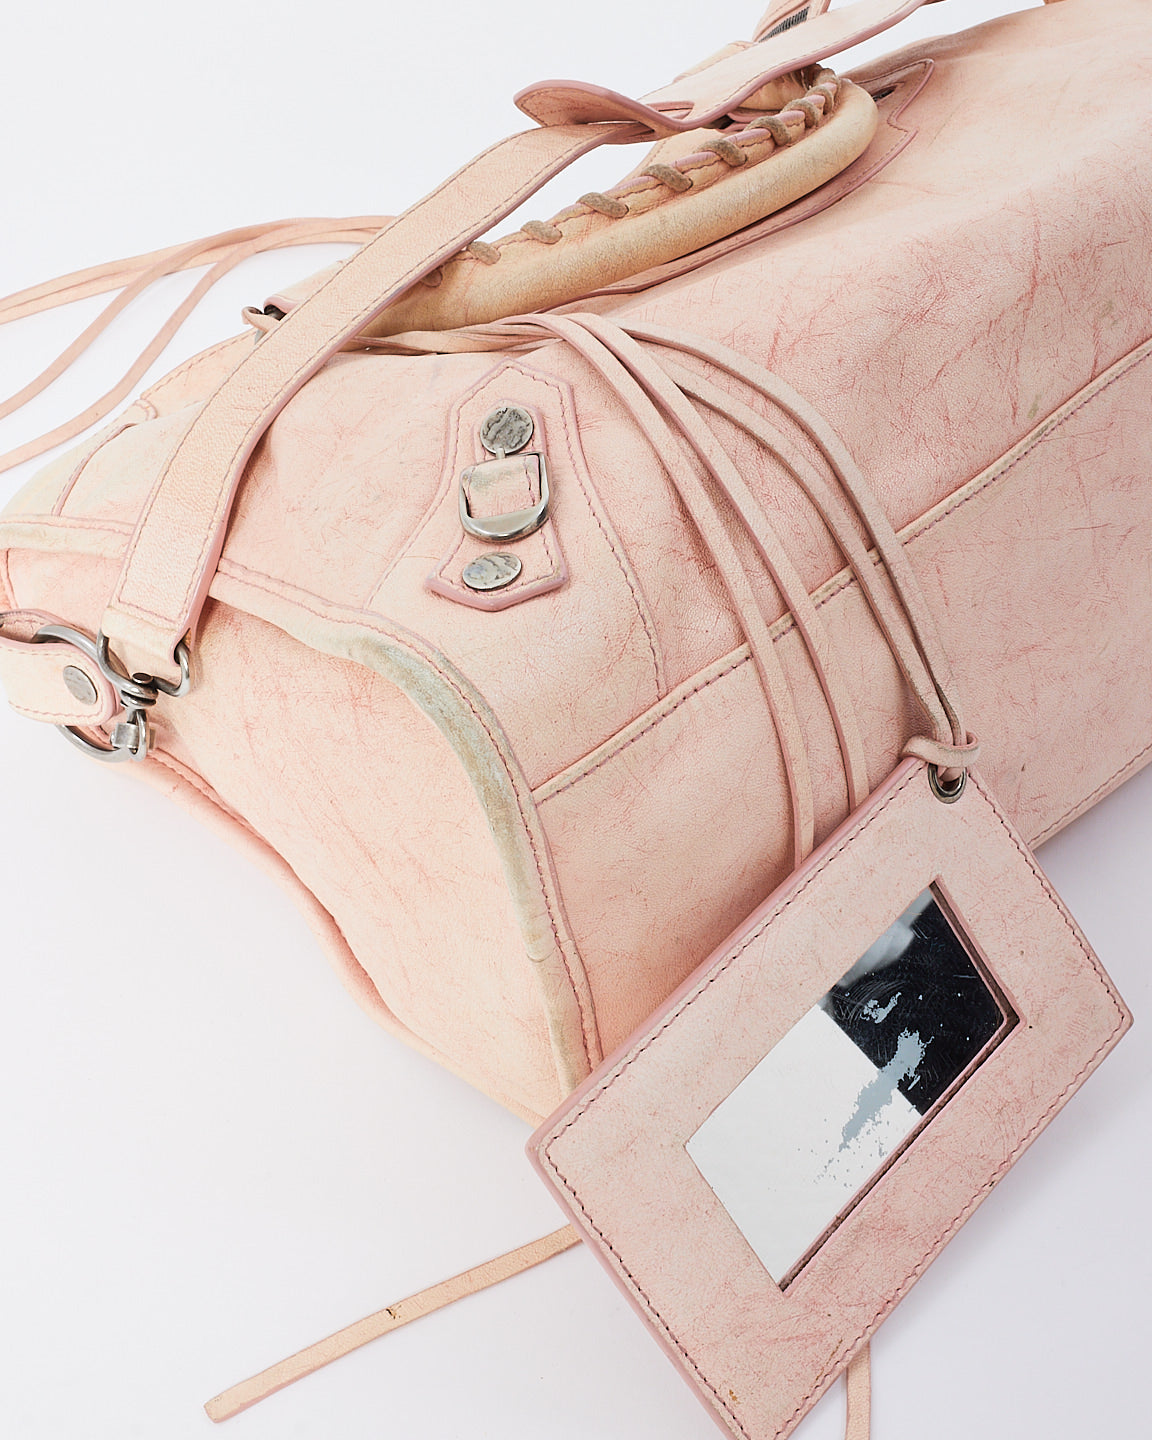 Balenciaga Pink Leather City Bag with Hammered Studs